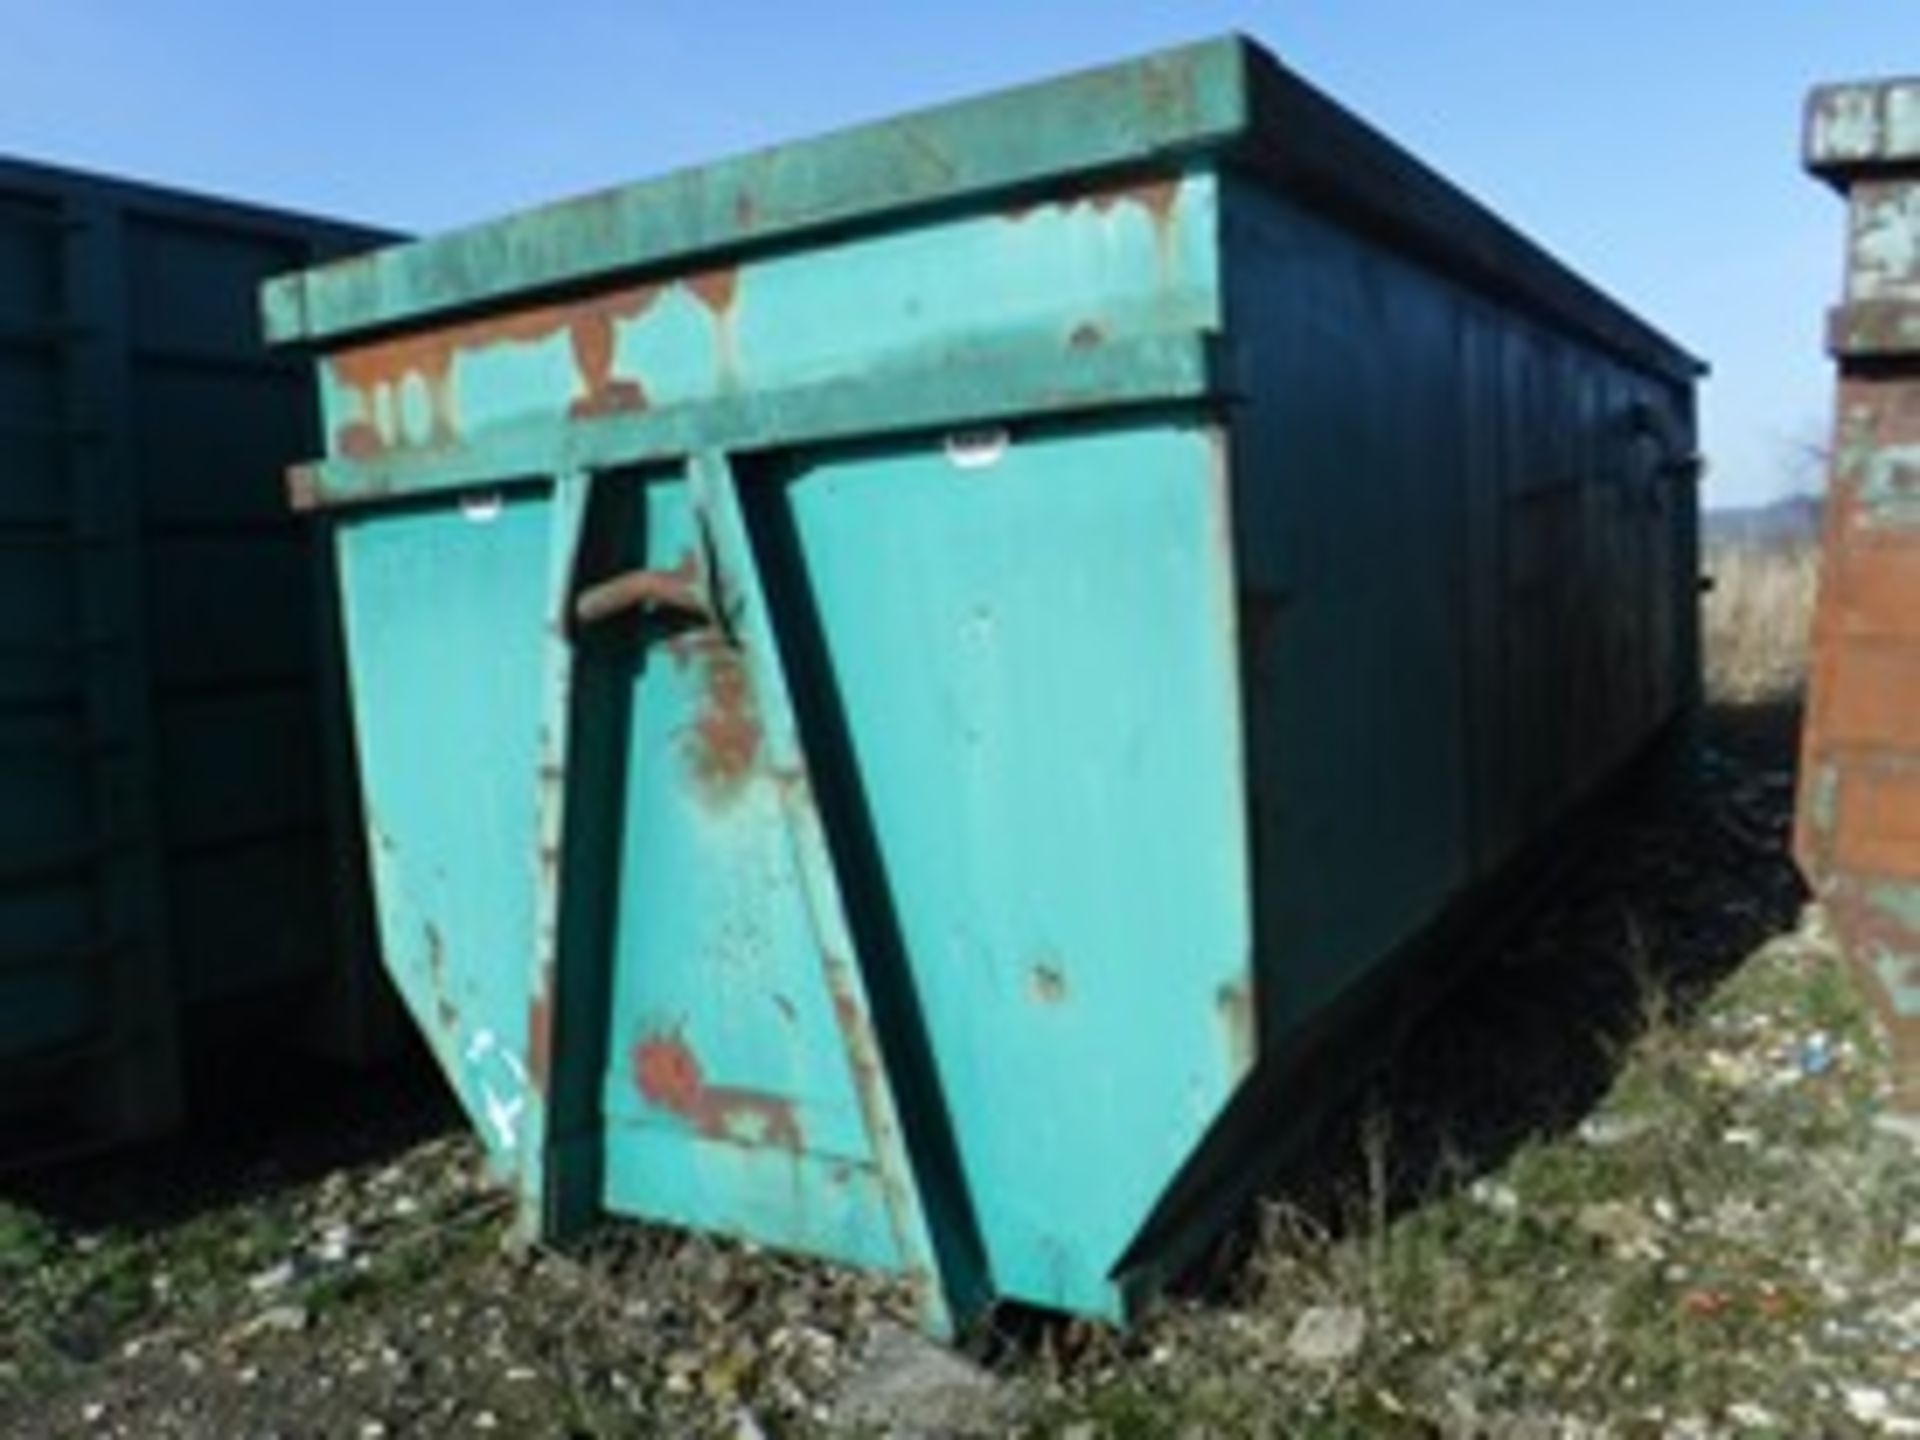 OPEN TOP SKIP.2 REAR DOORS MANFACTURED BY SKIP UNITS. W2300 H2400 L5950. VERY SLIGHT SURFACE RUST. V